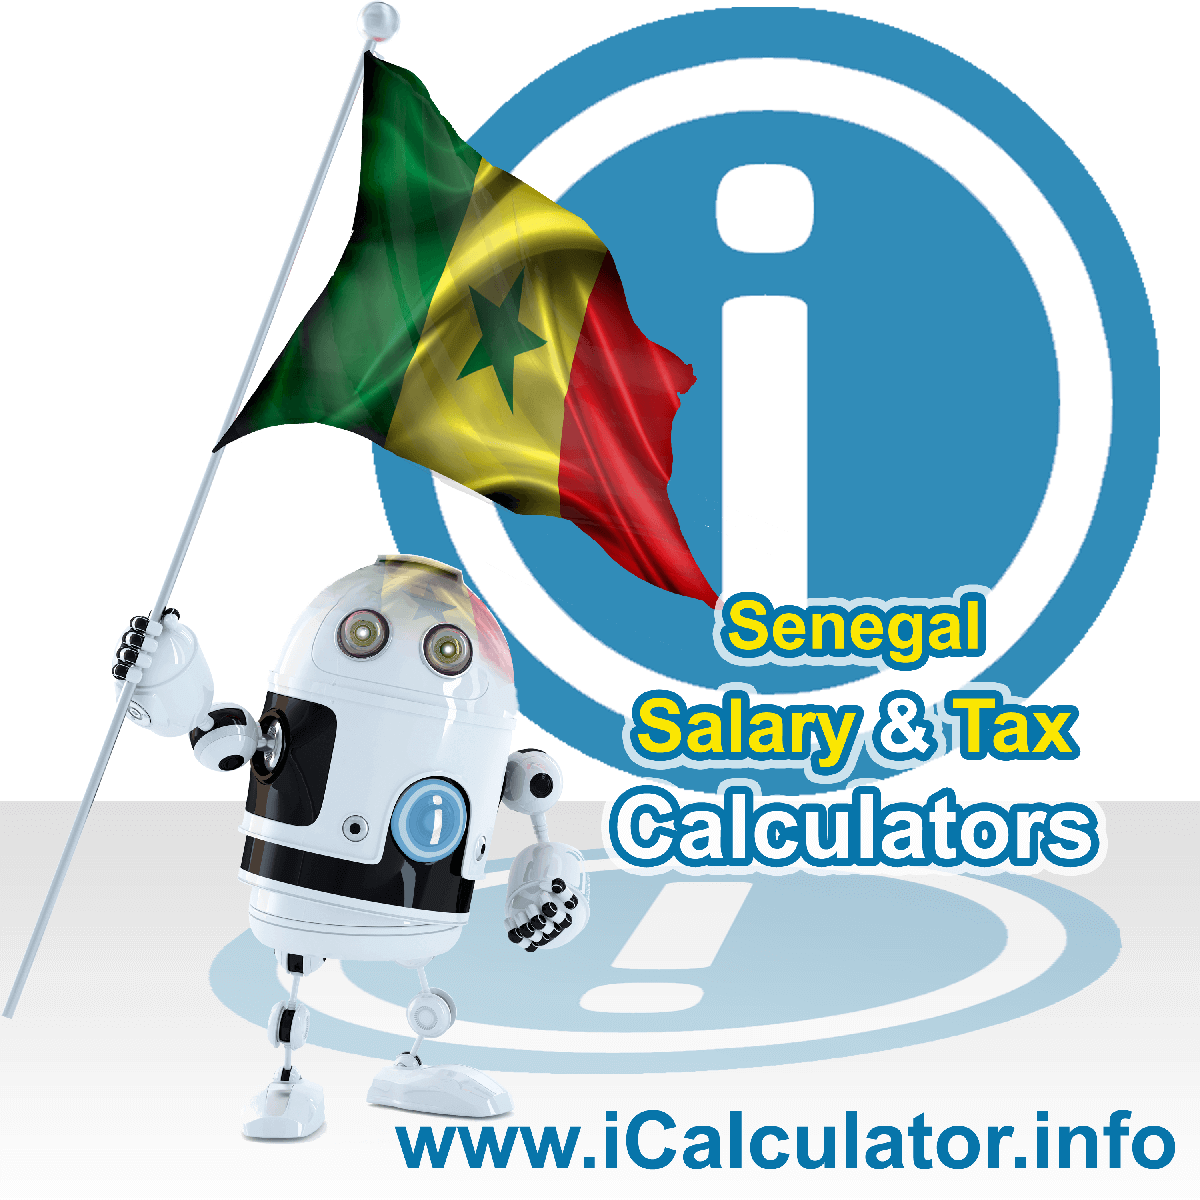 Senegal Tax Calculator. This image shows the Senegal flag and information relating to the tax formula for the Senegal Salary Calculator